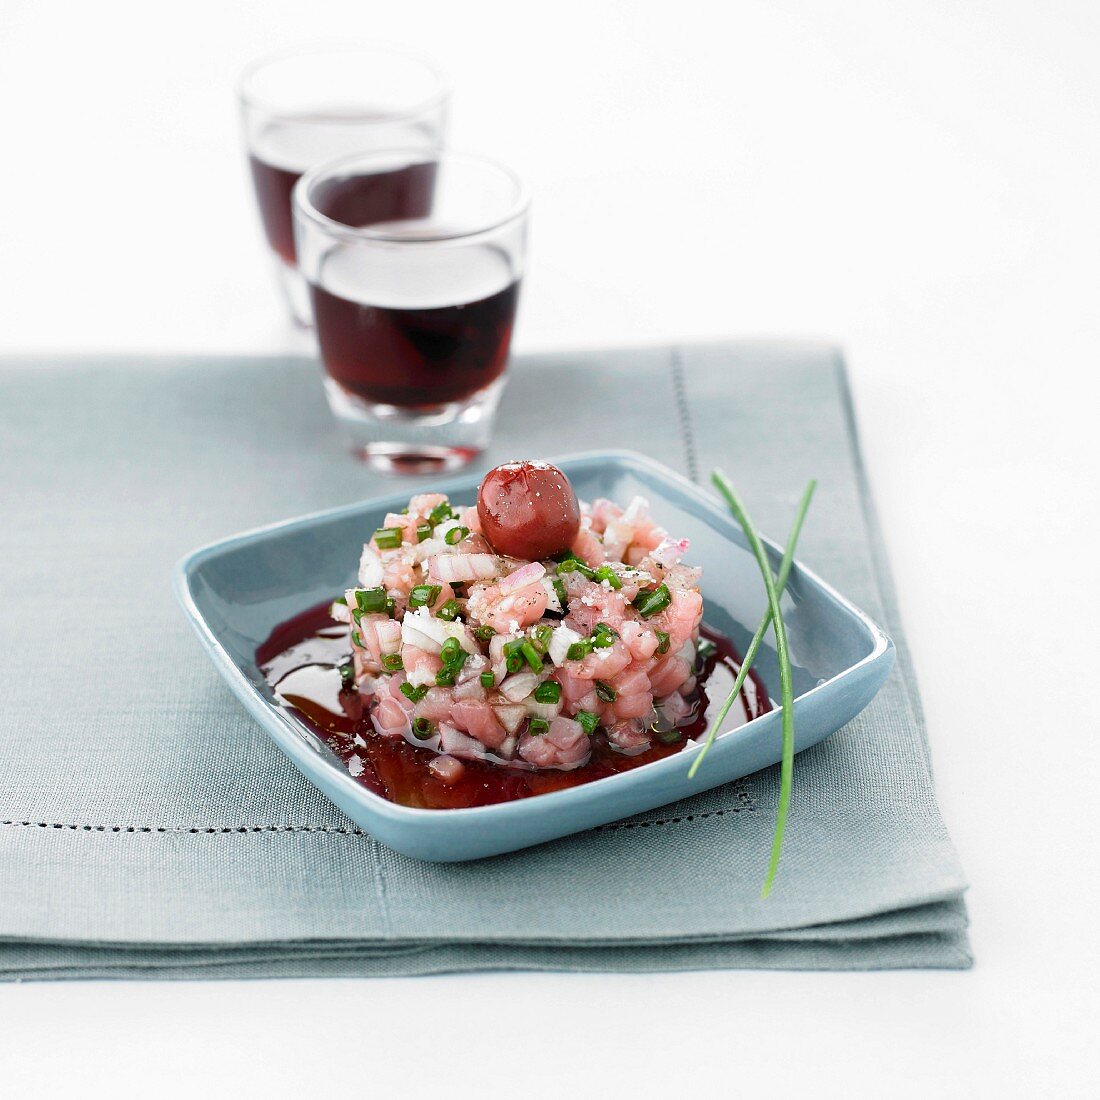 Veal tartare with shallots and cherry vinaigrette